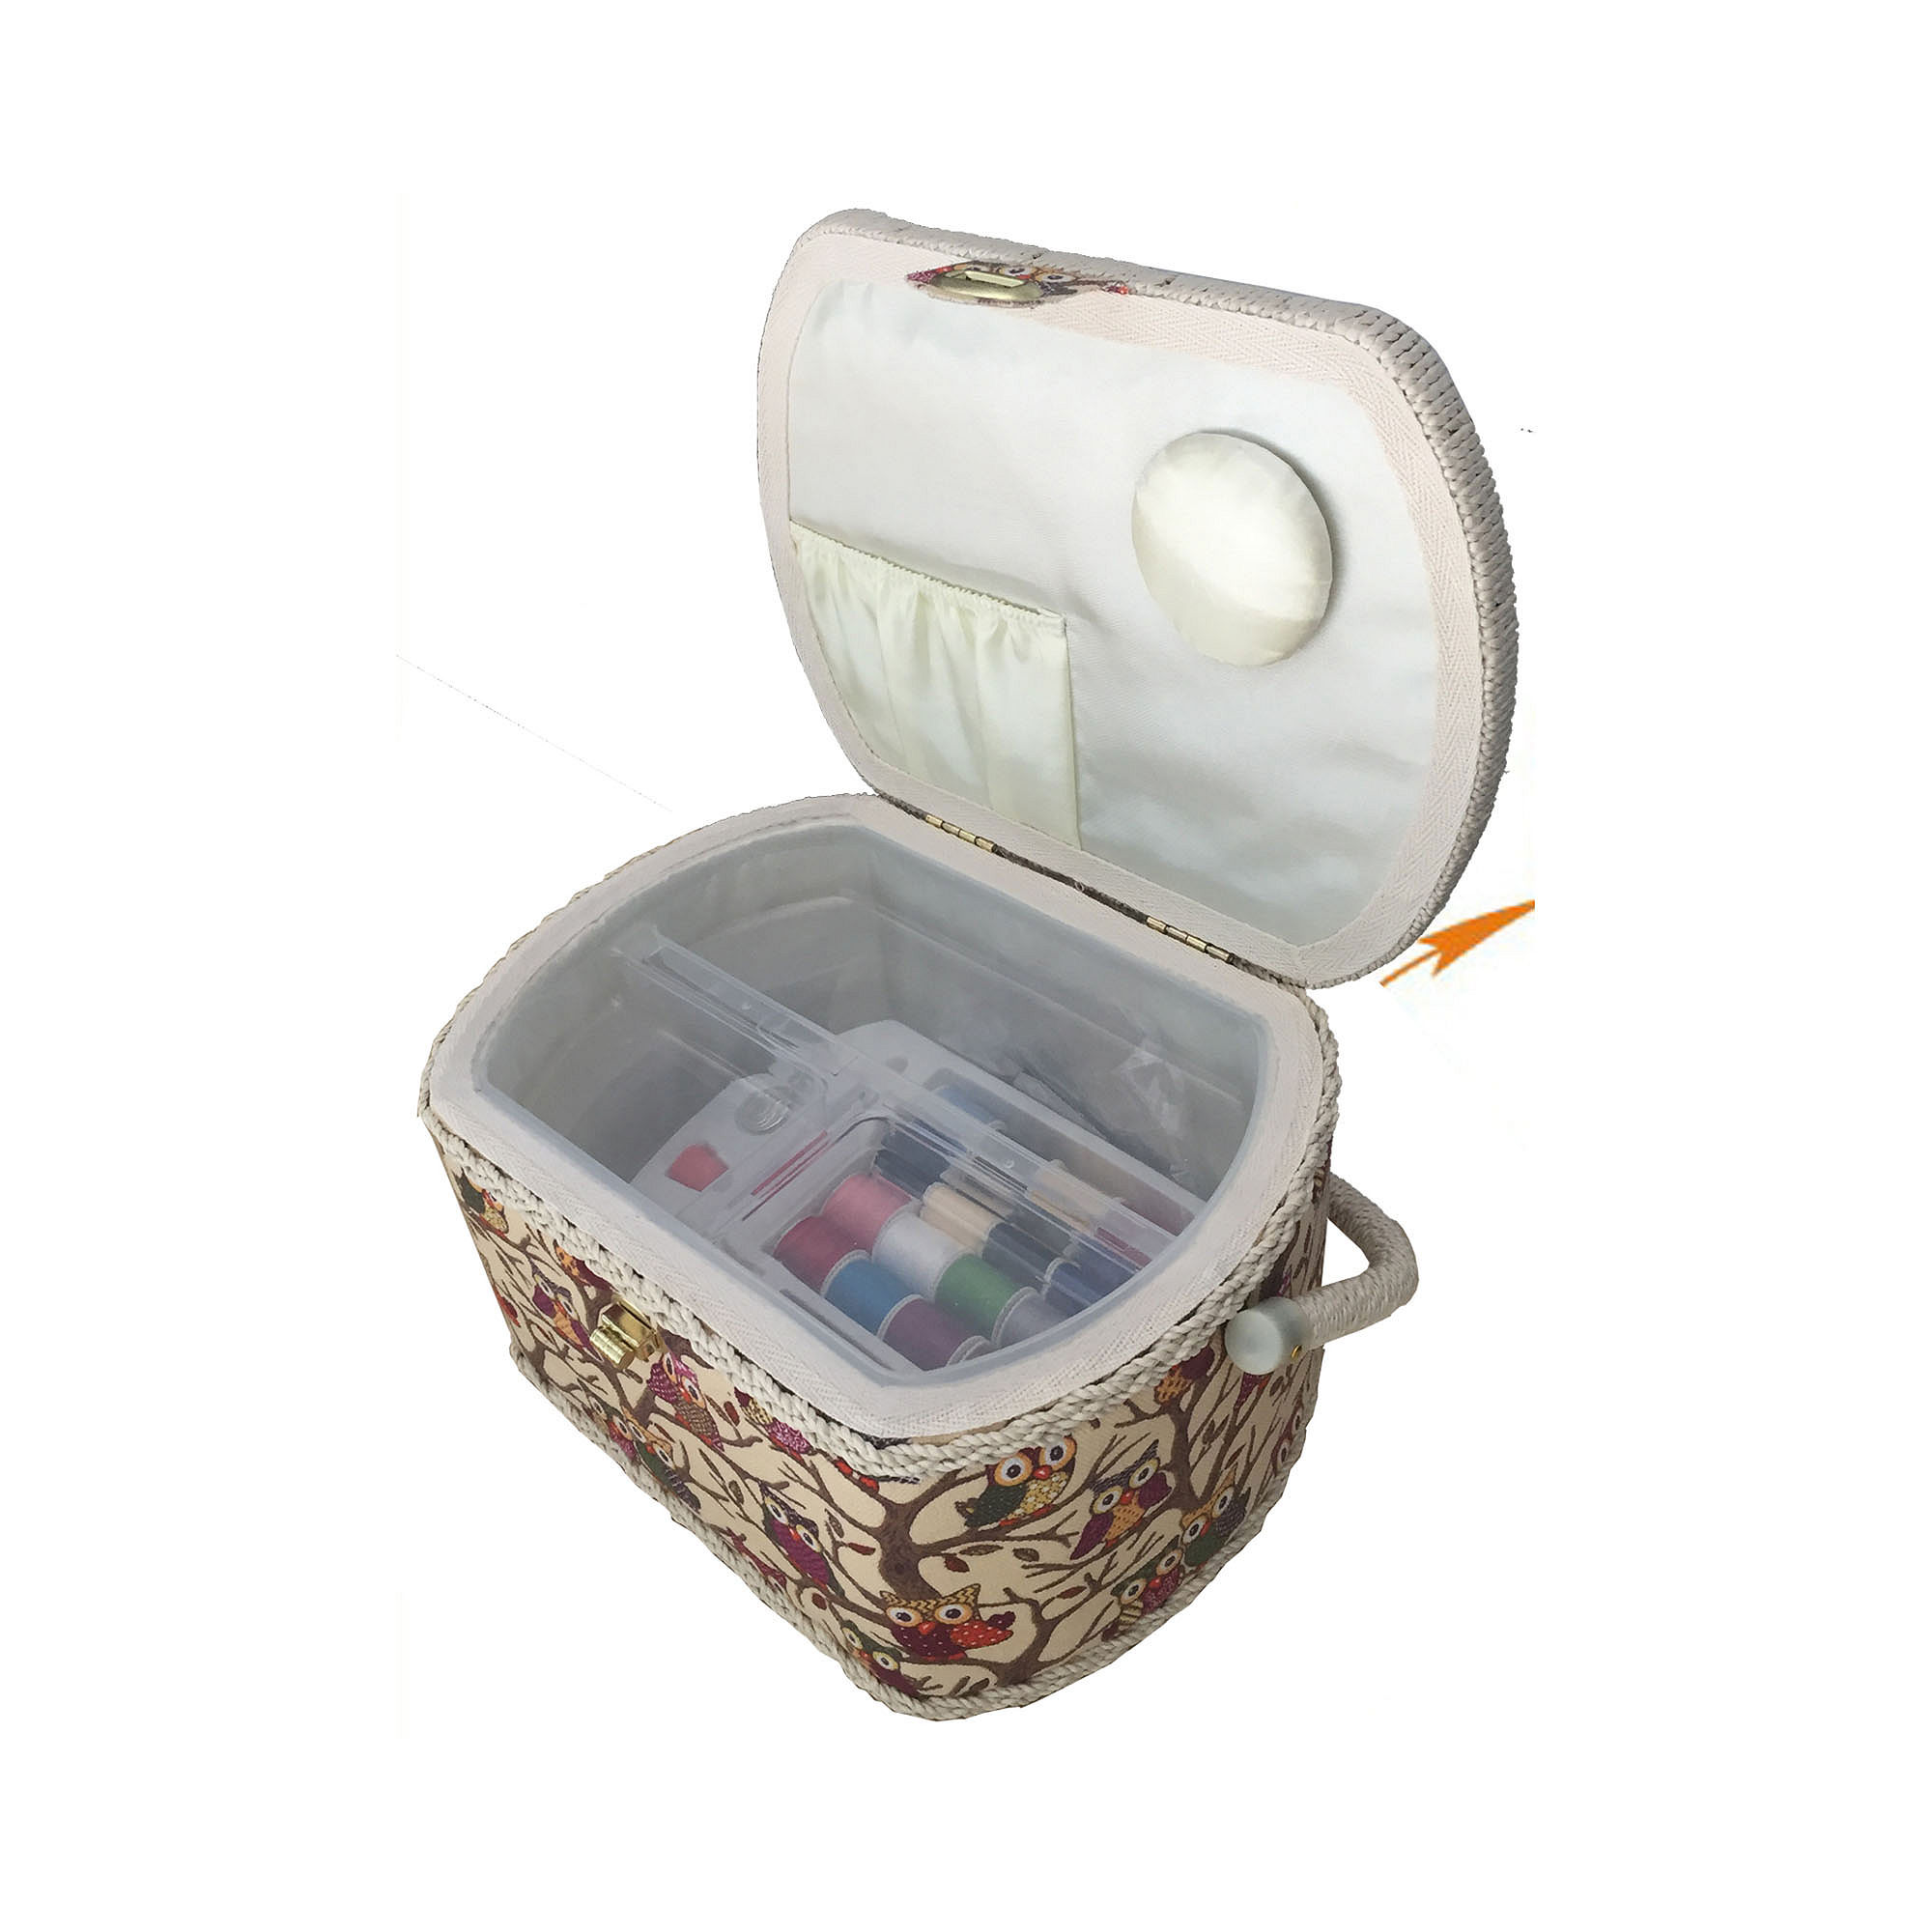 Michley FS-096 Sewing Basket with 41-pc. Sewing Kit